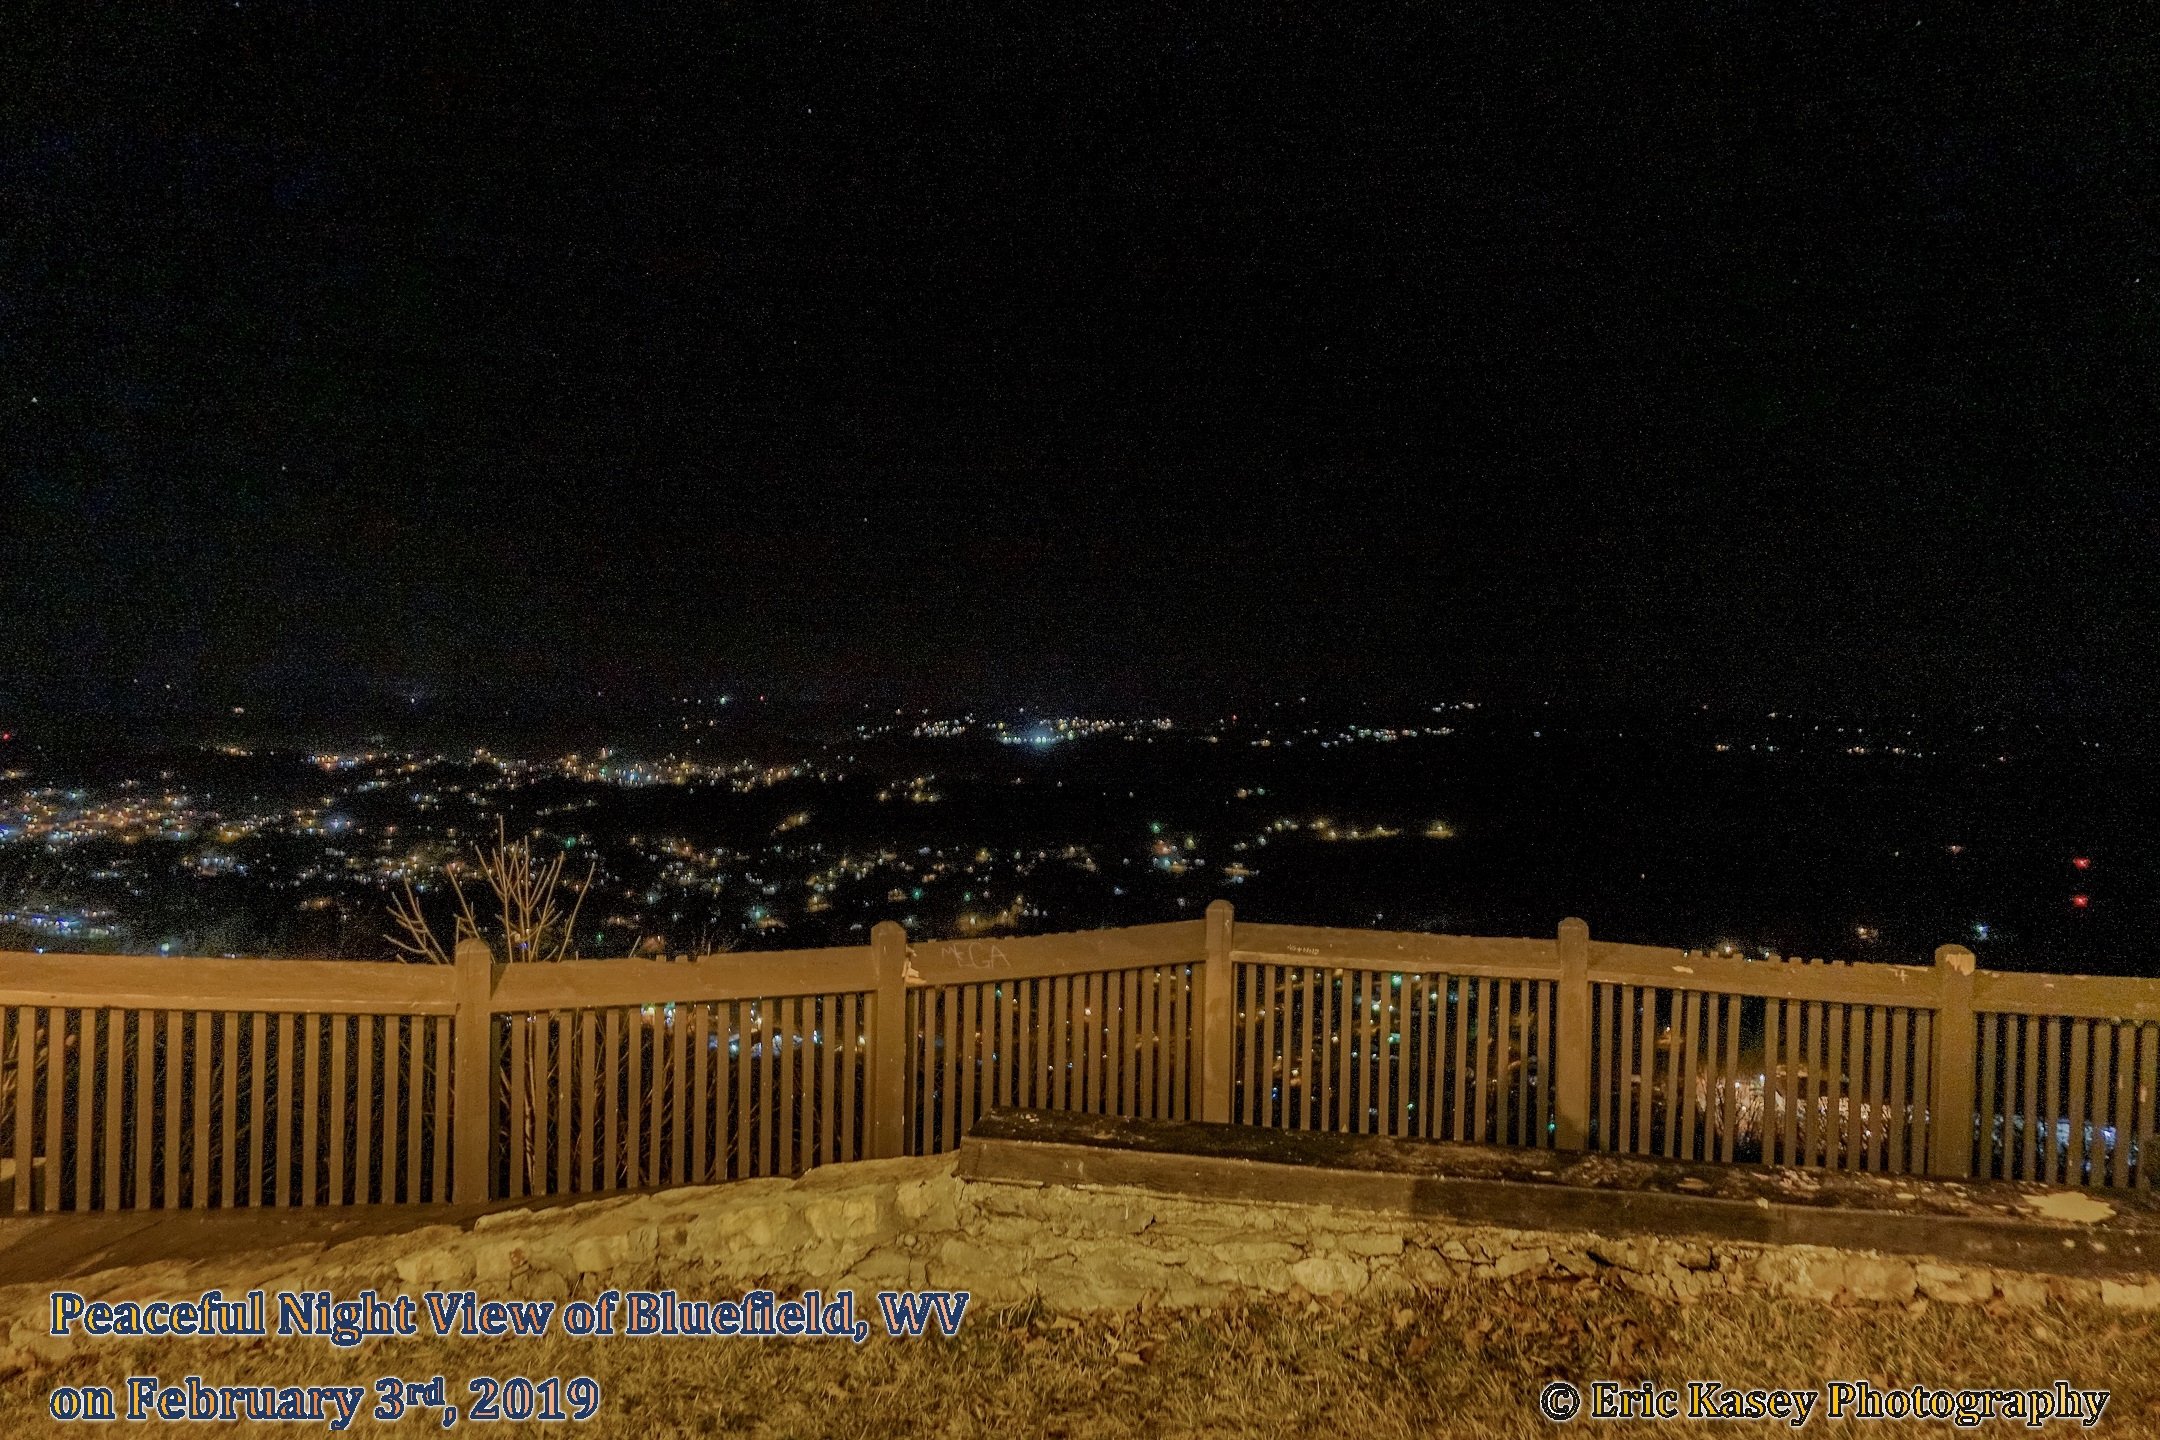 8 - Peaceful Night View of Bluefield, WV on February 3rd, 2019.JPG